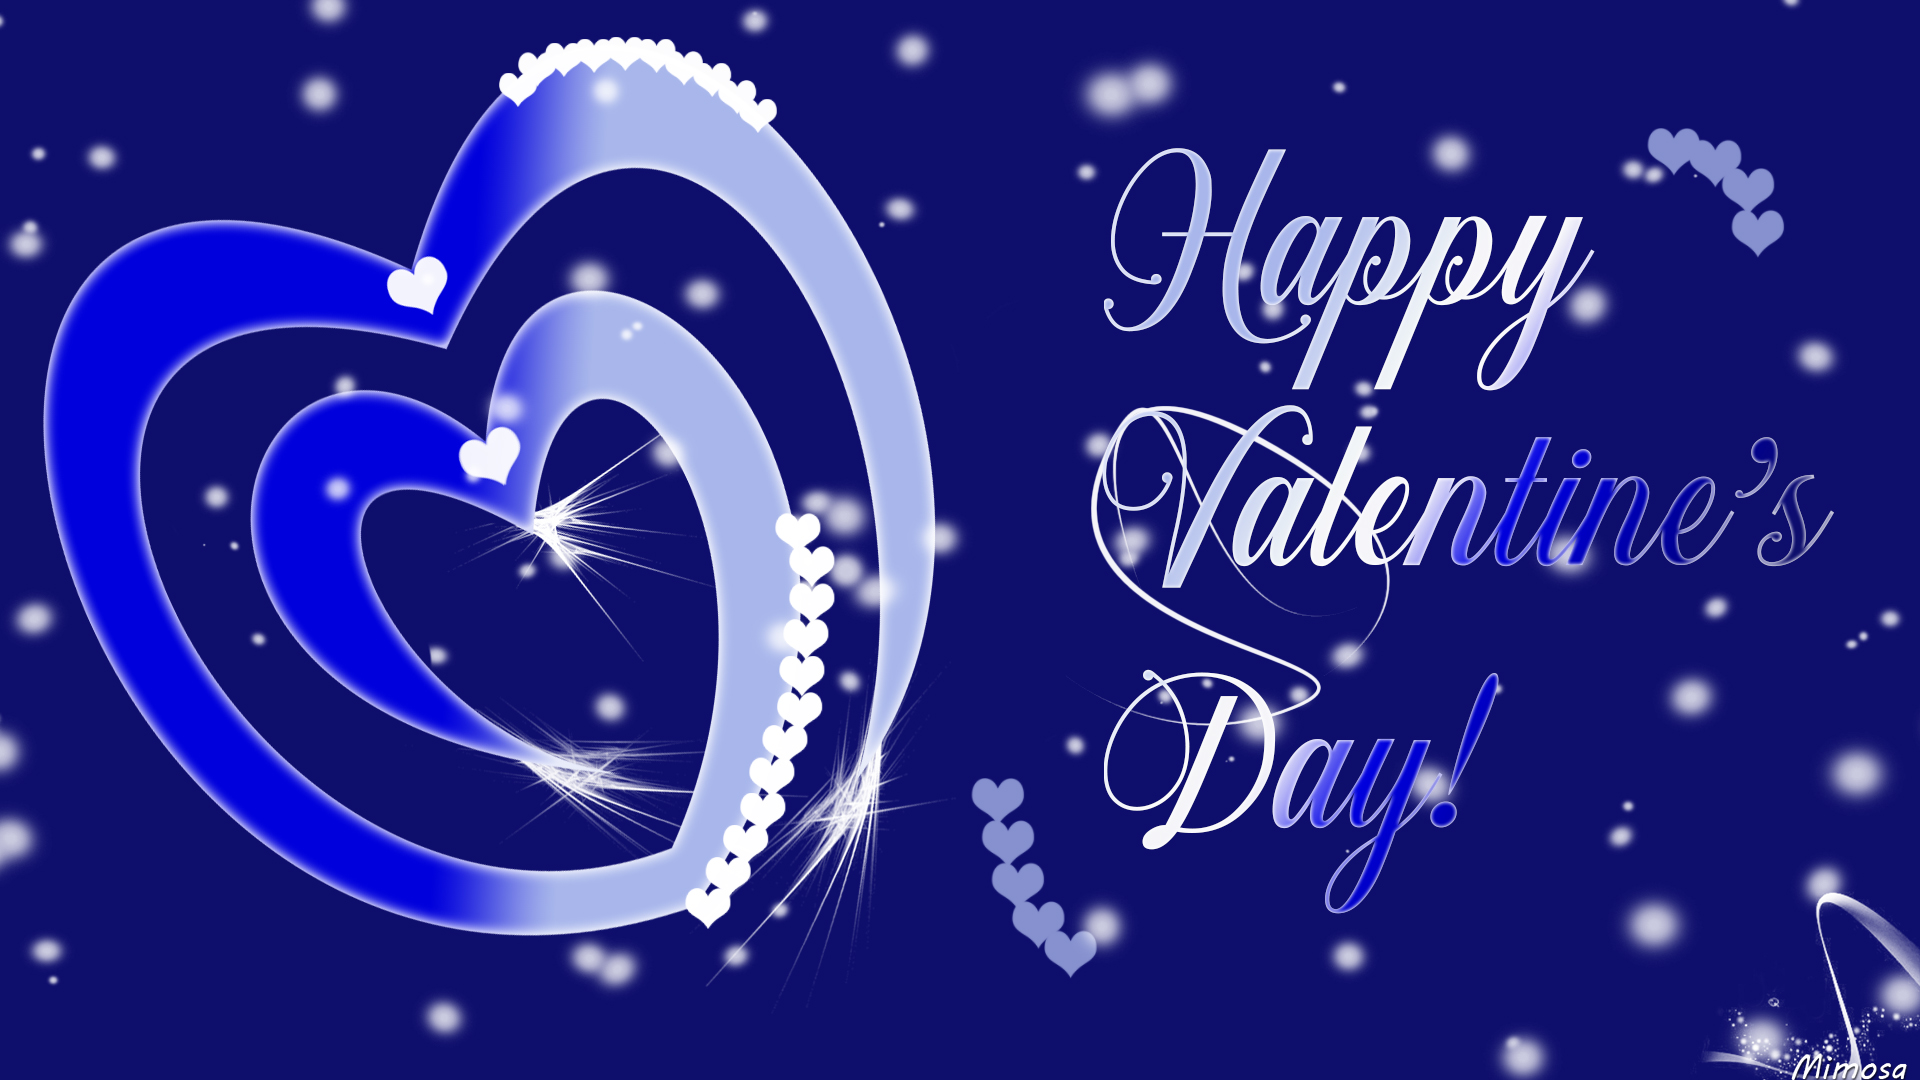 Valentine Day, Holiday, Artistic, Typography, Blue, Heart, Abstract, Love